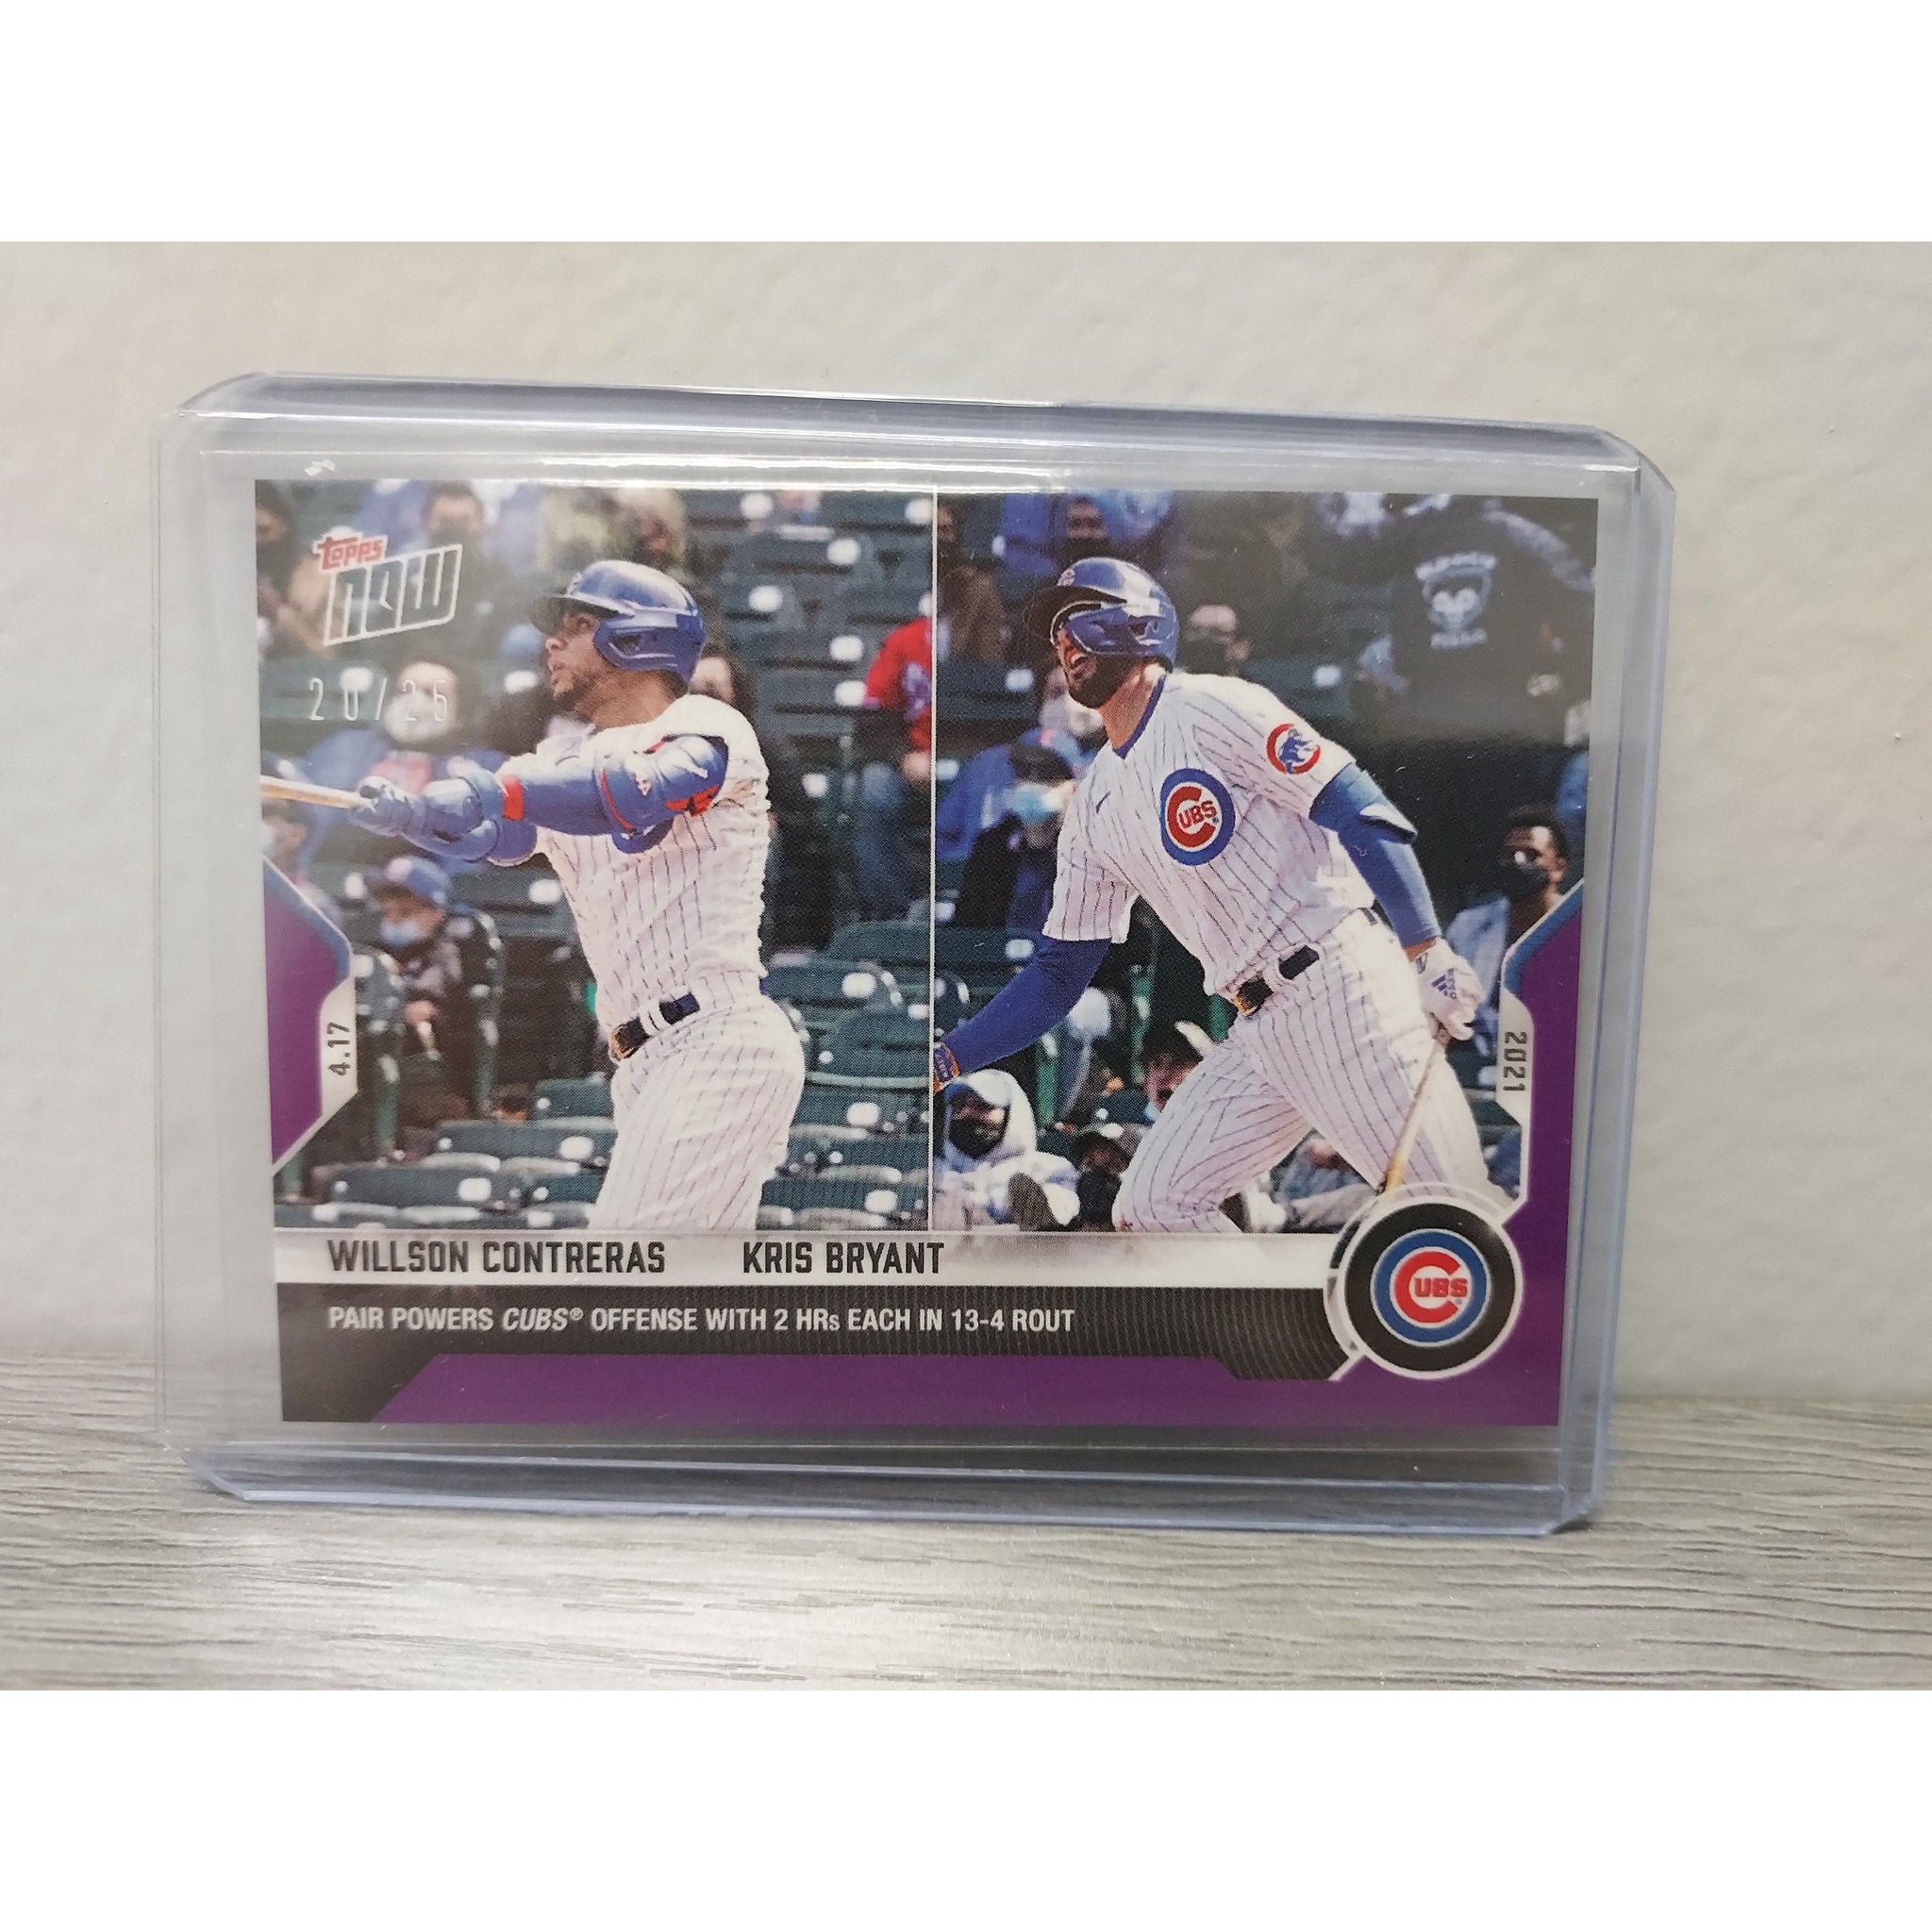 Contreras/Bryant - 2021 MLB TOPPS NOW Card 89-Purple Parallel #20/25